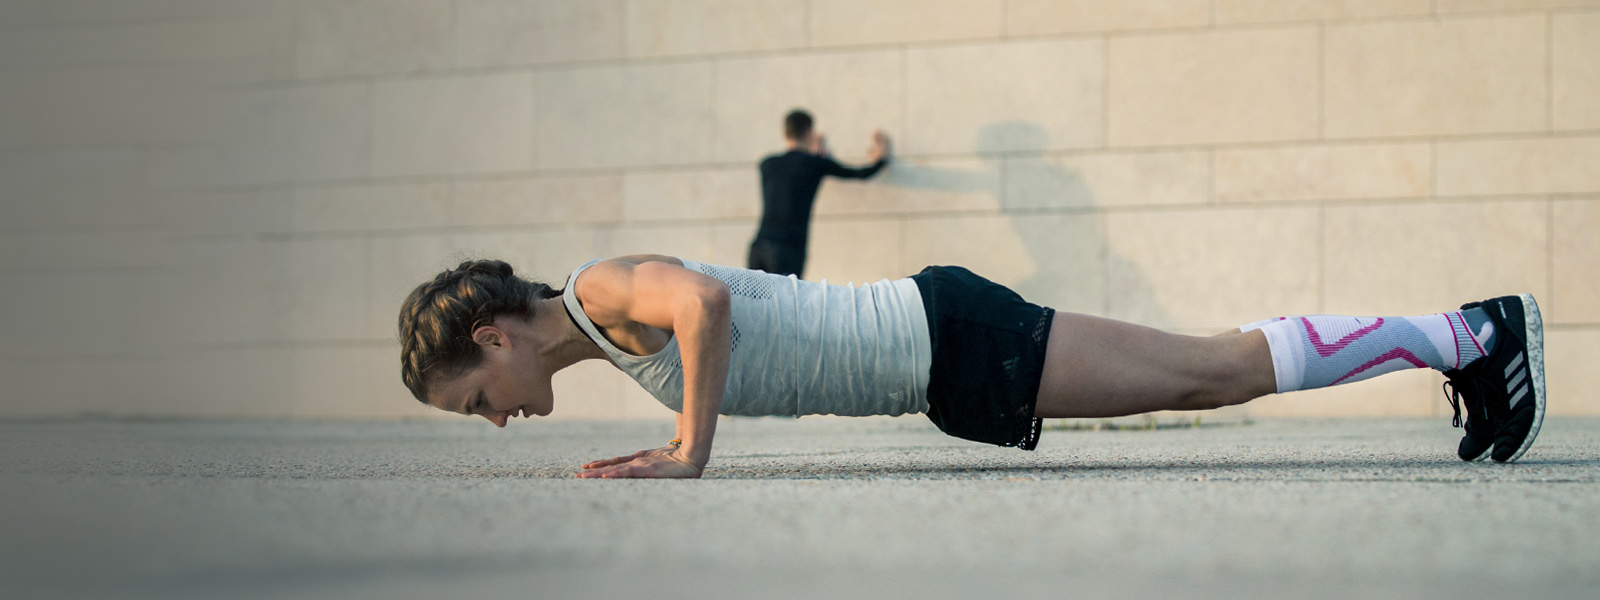 Woman makes push-ups on a concrete floor in the background a man stretches on a wall